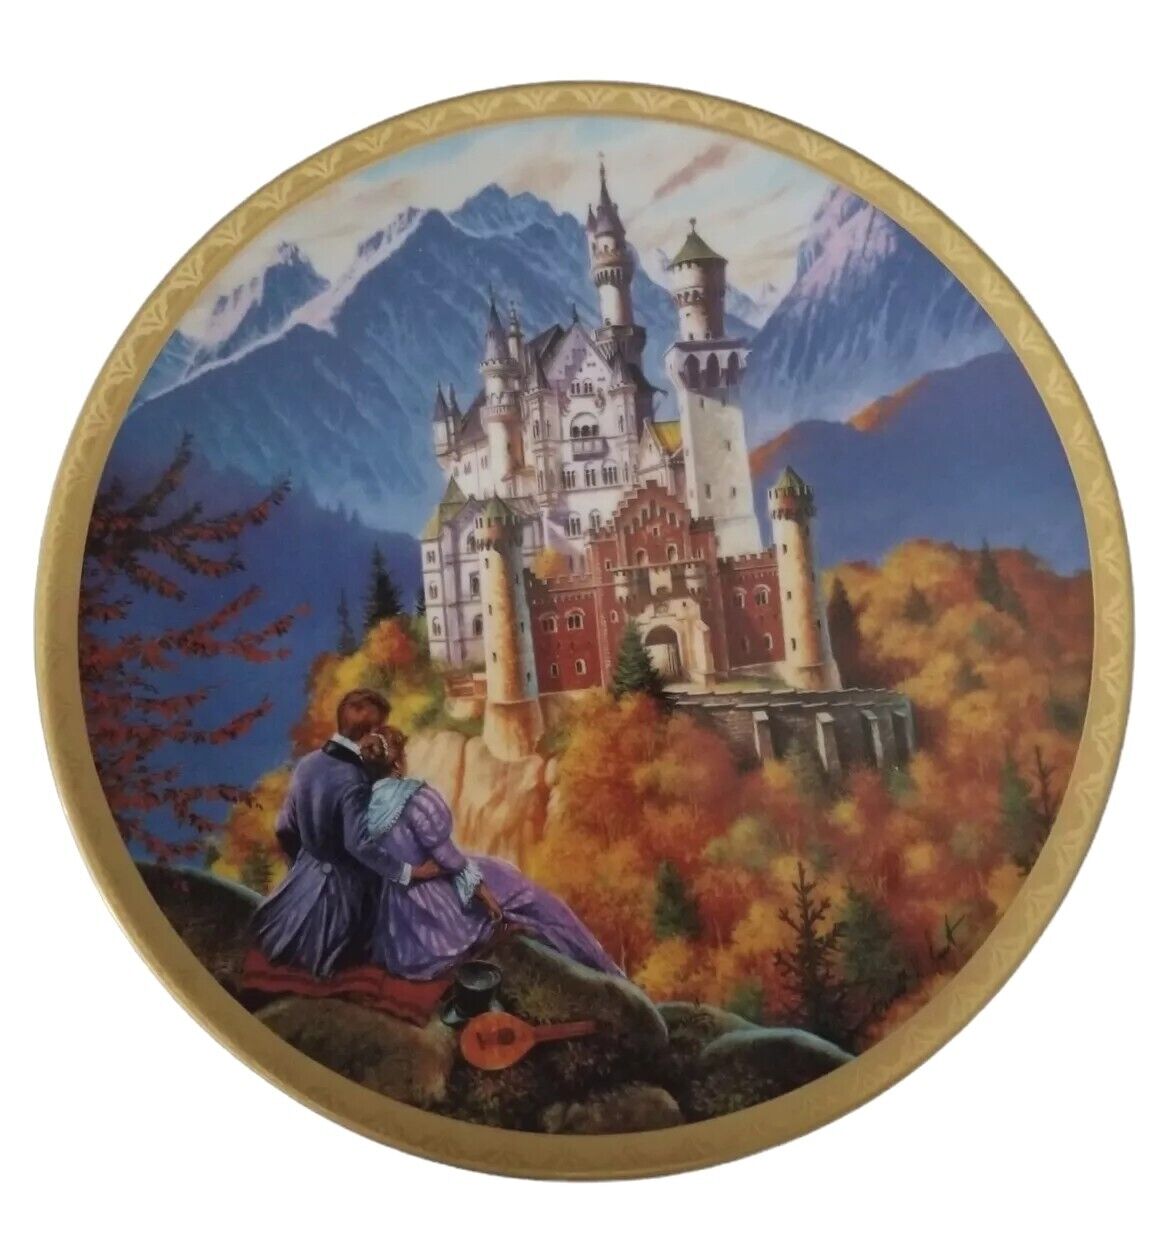 Collection Plate Darrell K. Sweet Romantic Castles of Europe LE Gold Trim 90-92